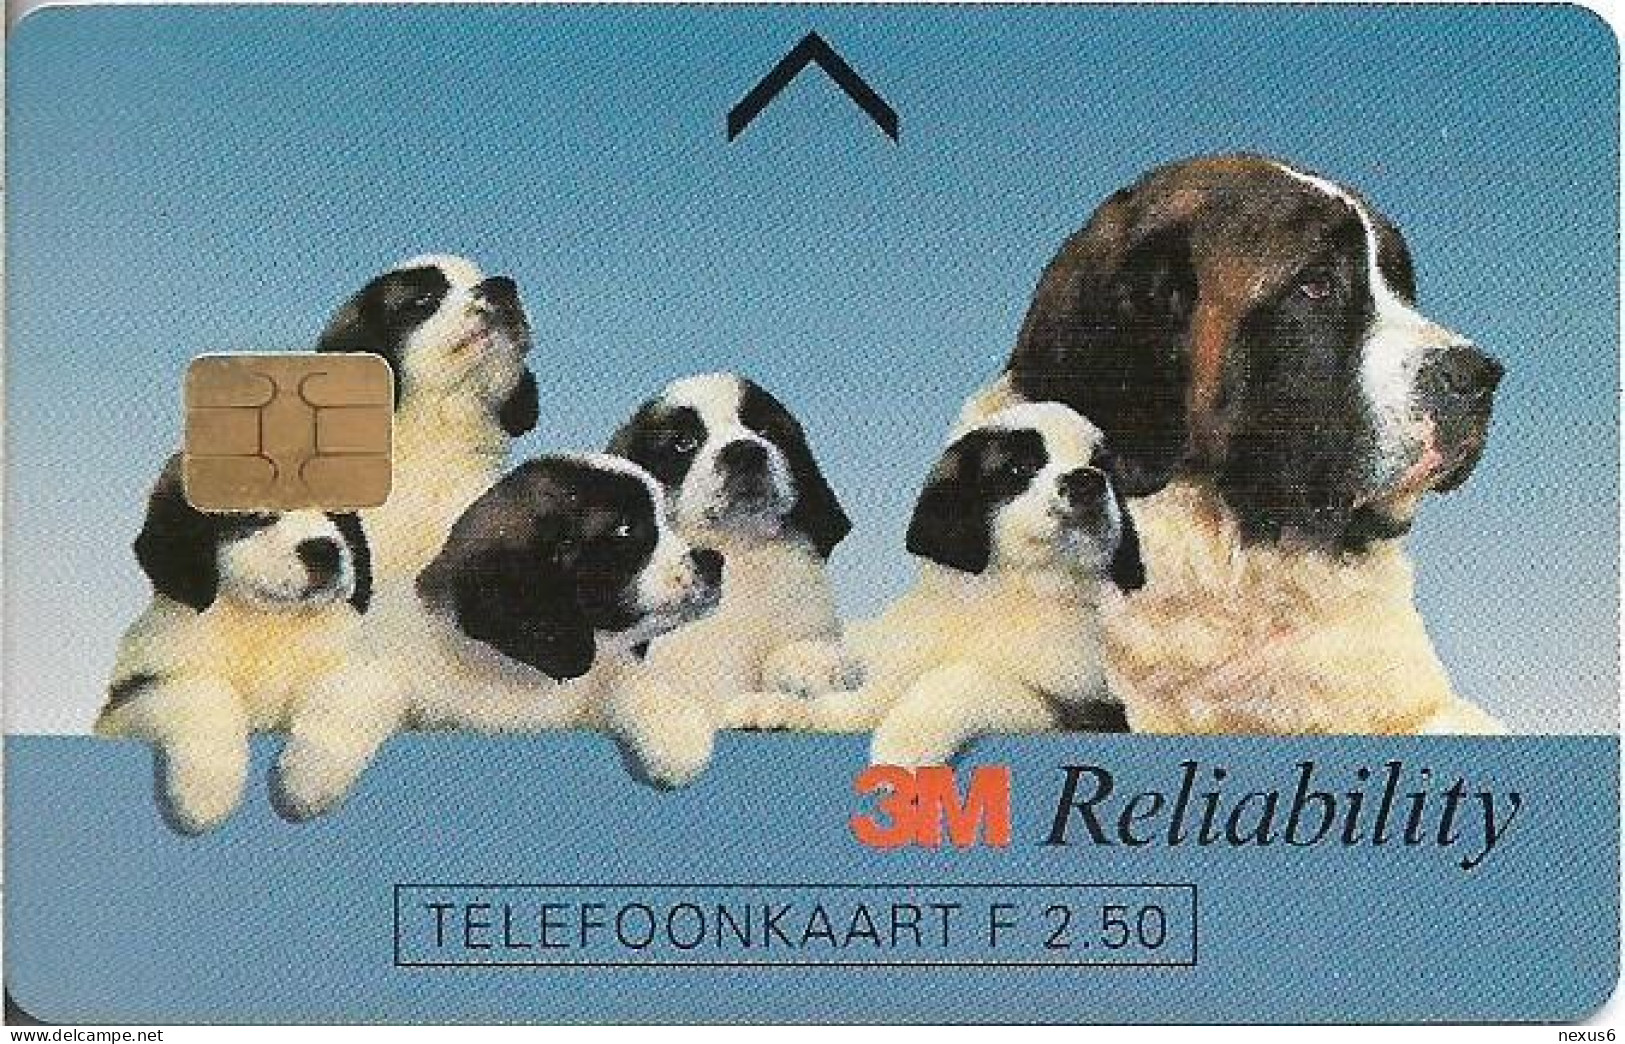 Netherlands - KPN - Chip - CRD130-02A - 3M Reliability, 08.1995, 2.50ƒ, Mint - Private